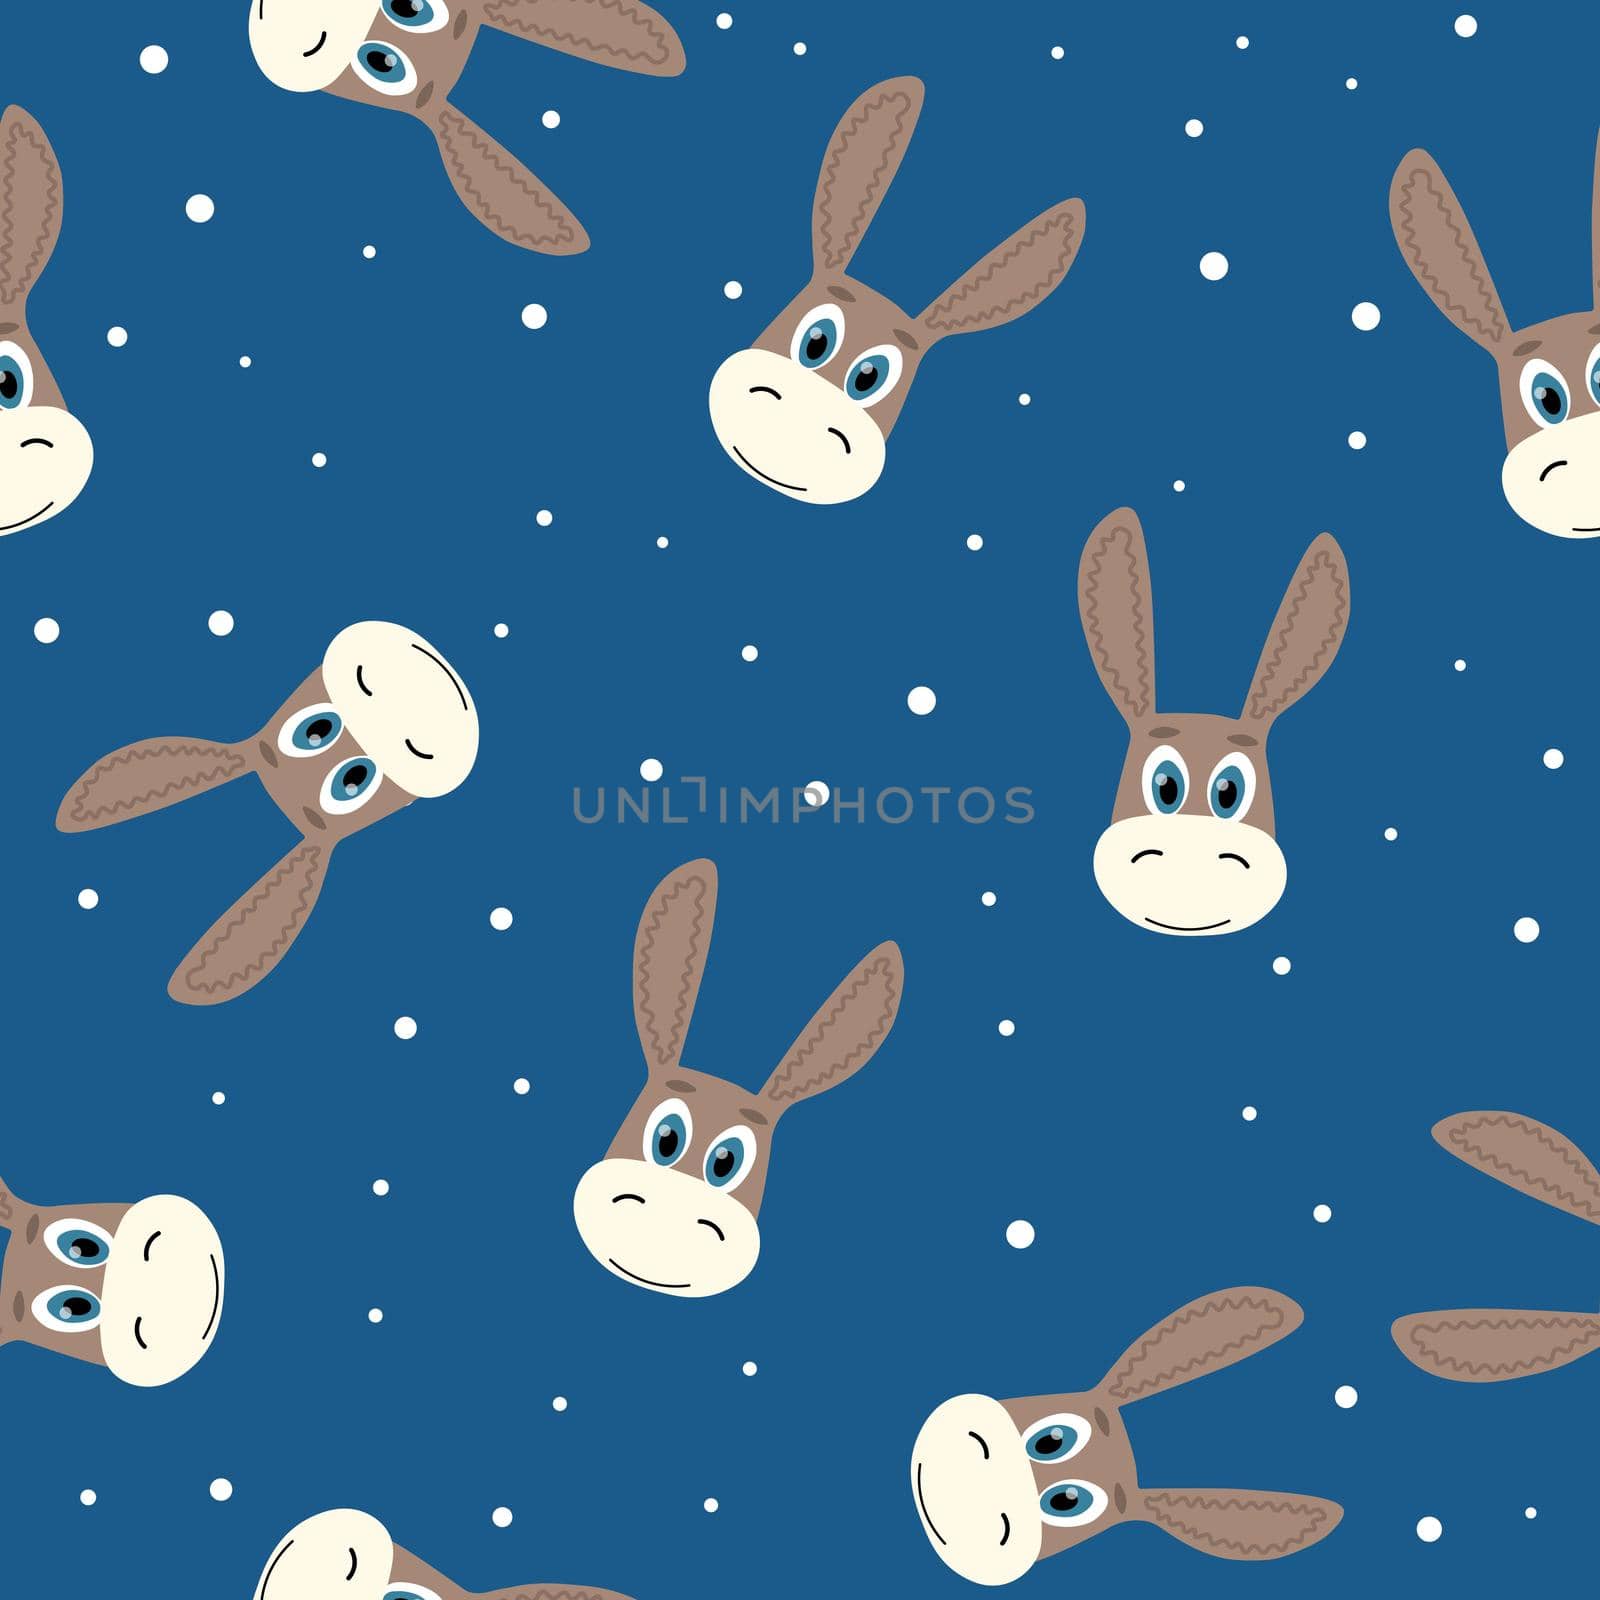 Vector flat animals colorful illustration for kids. Seamless pattern with cute donkey face on blue polka dots background. Cartoon adorable character. Design for textures, card, poster, fabric,textile. by allaku